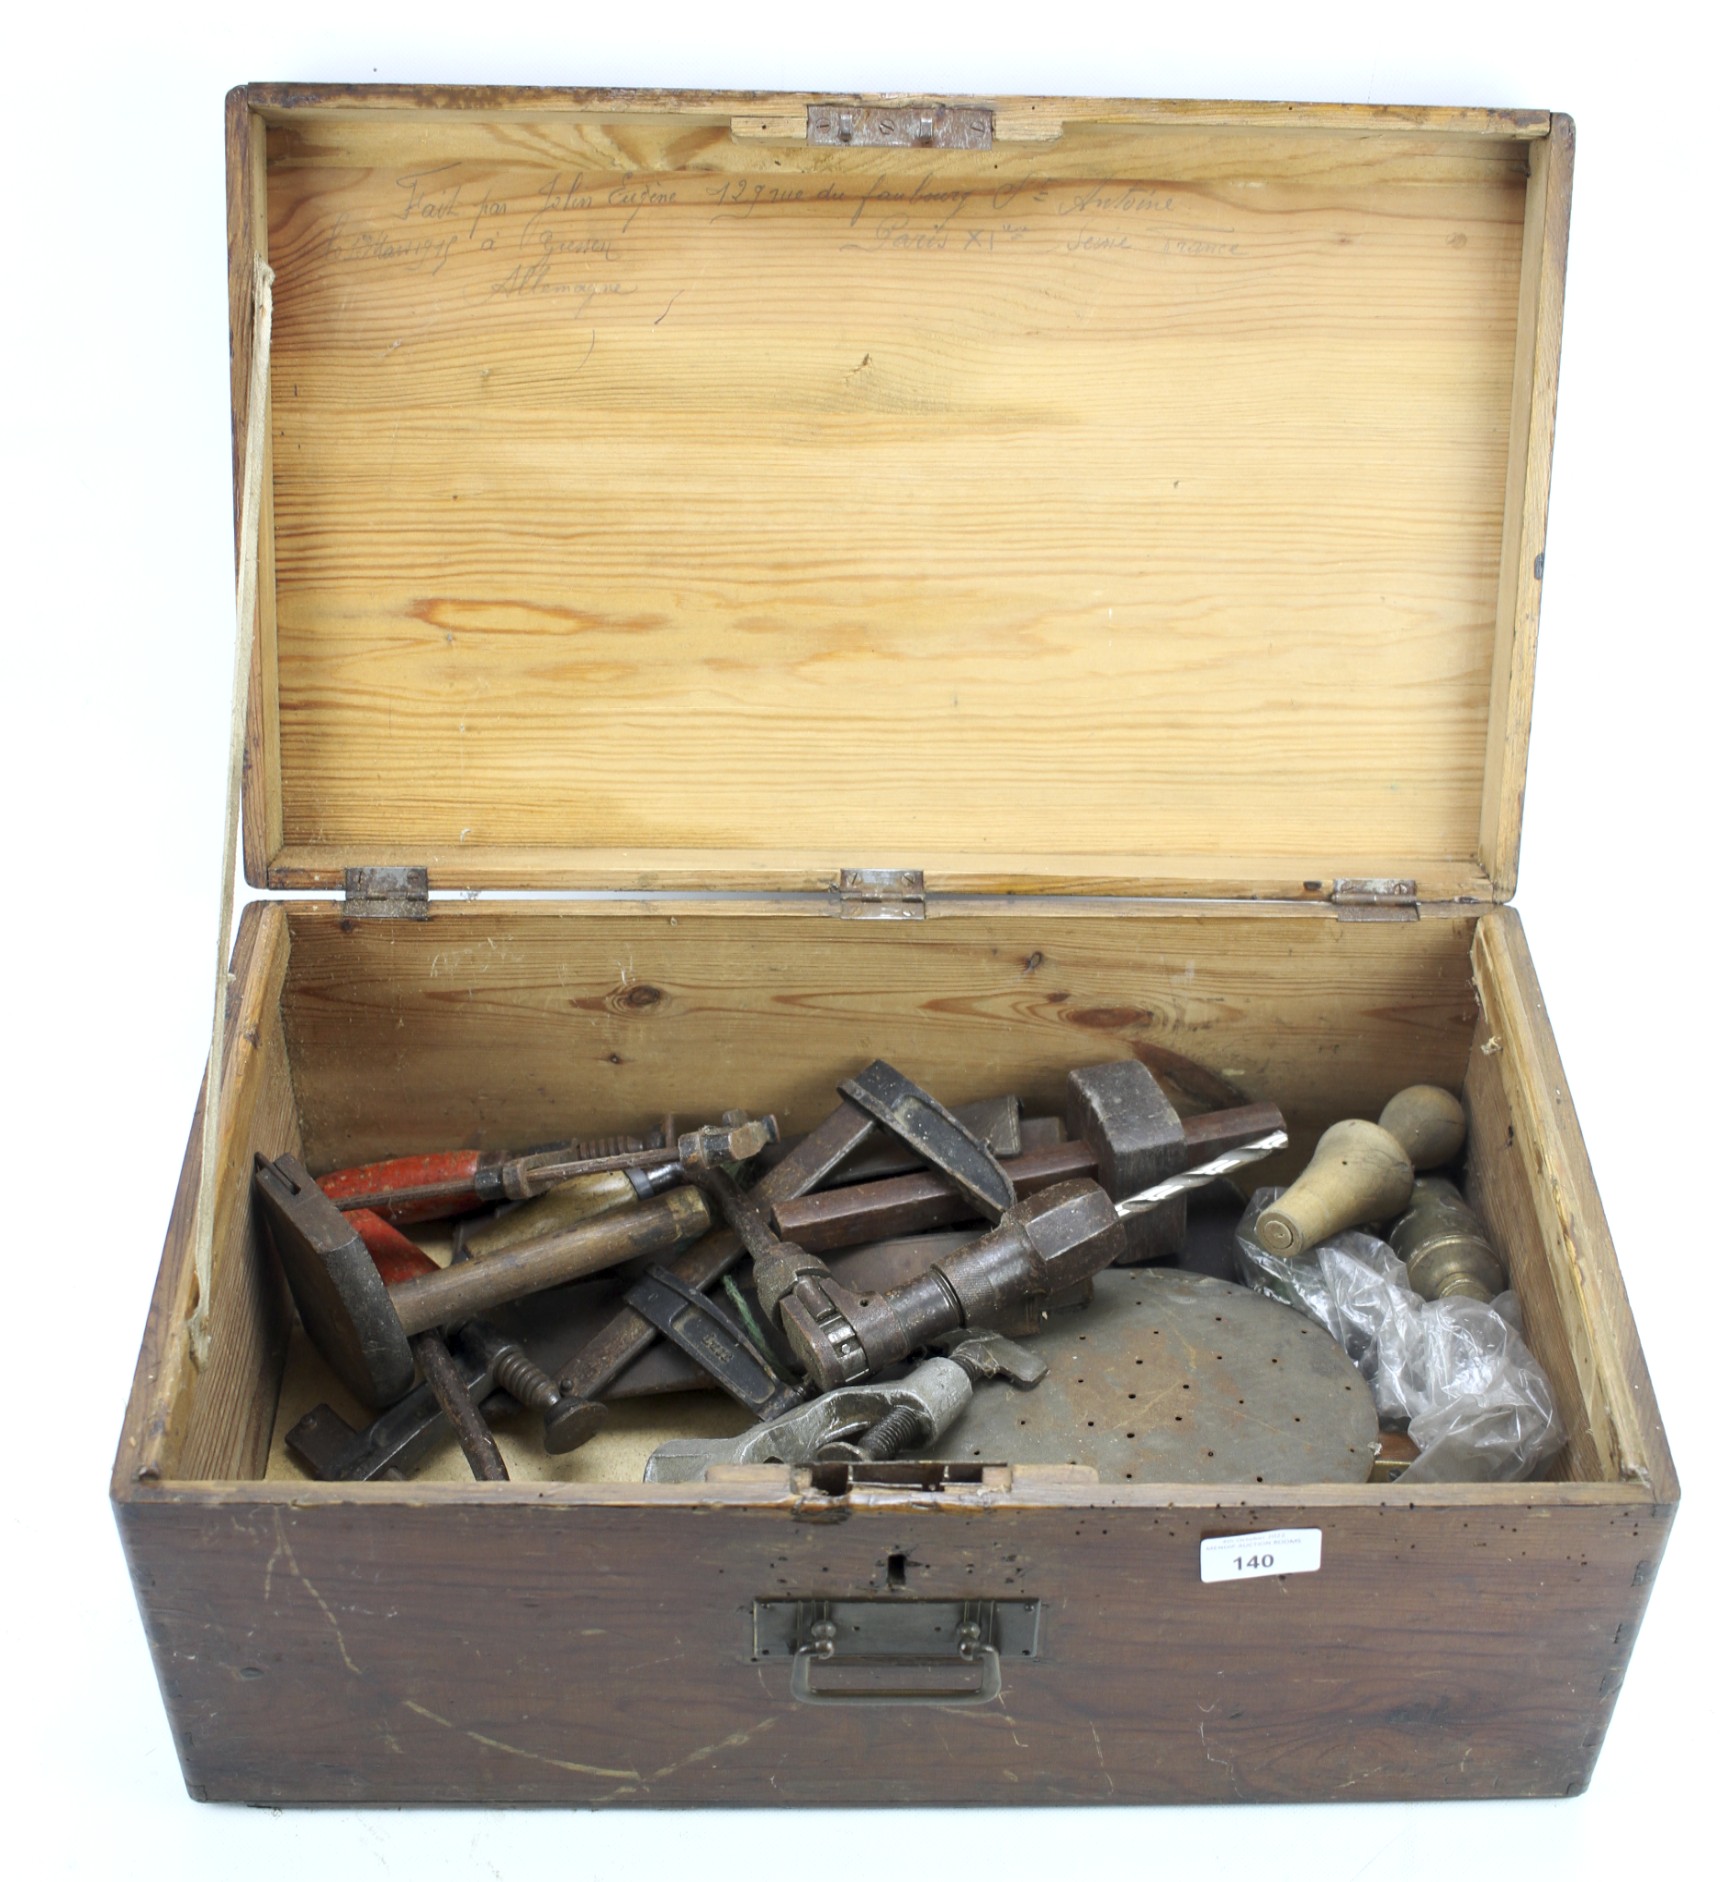 A 19th century pitch pine workman's trunk. Complete with an assortment of vintage braces and tools.